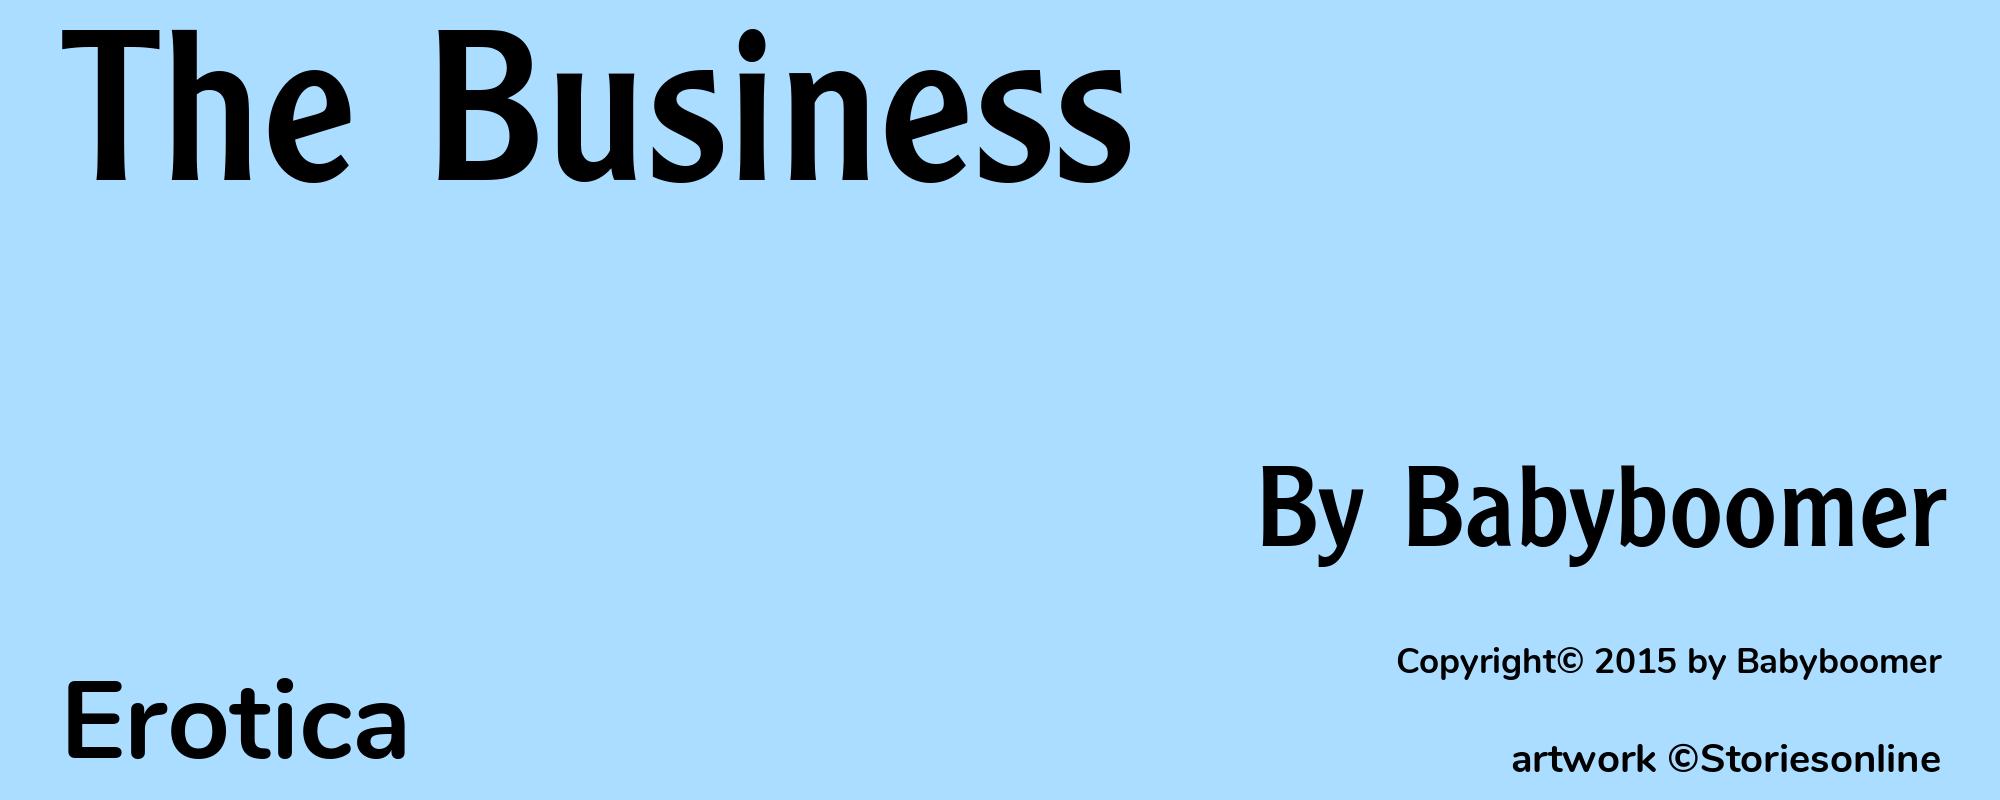 The Business - Cover